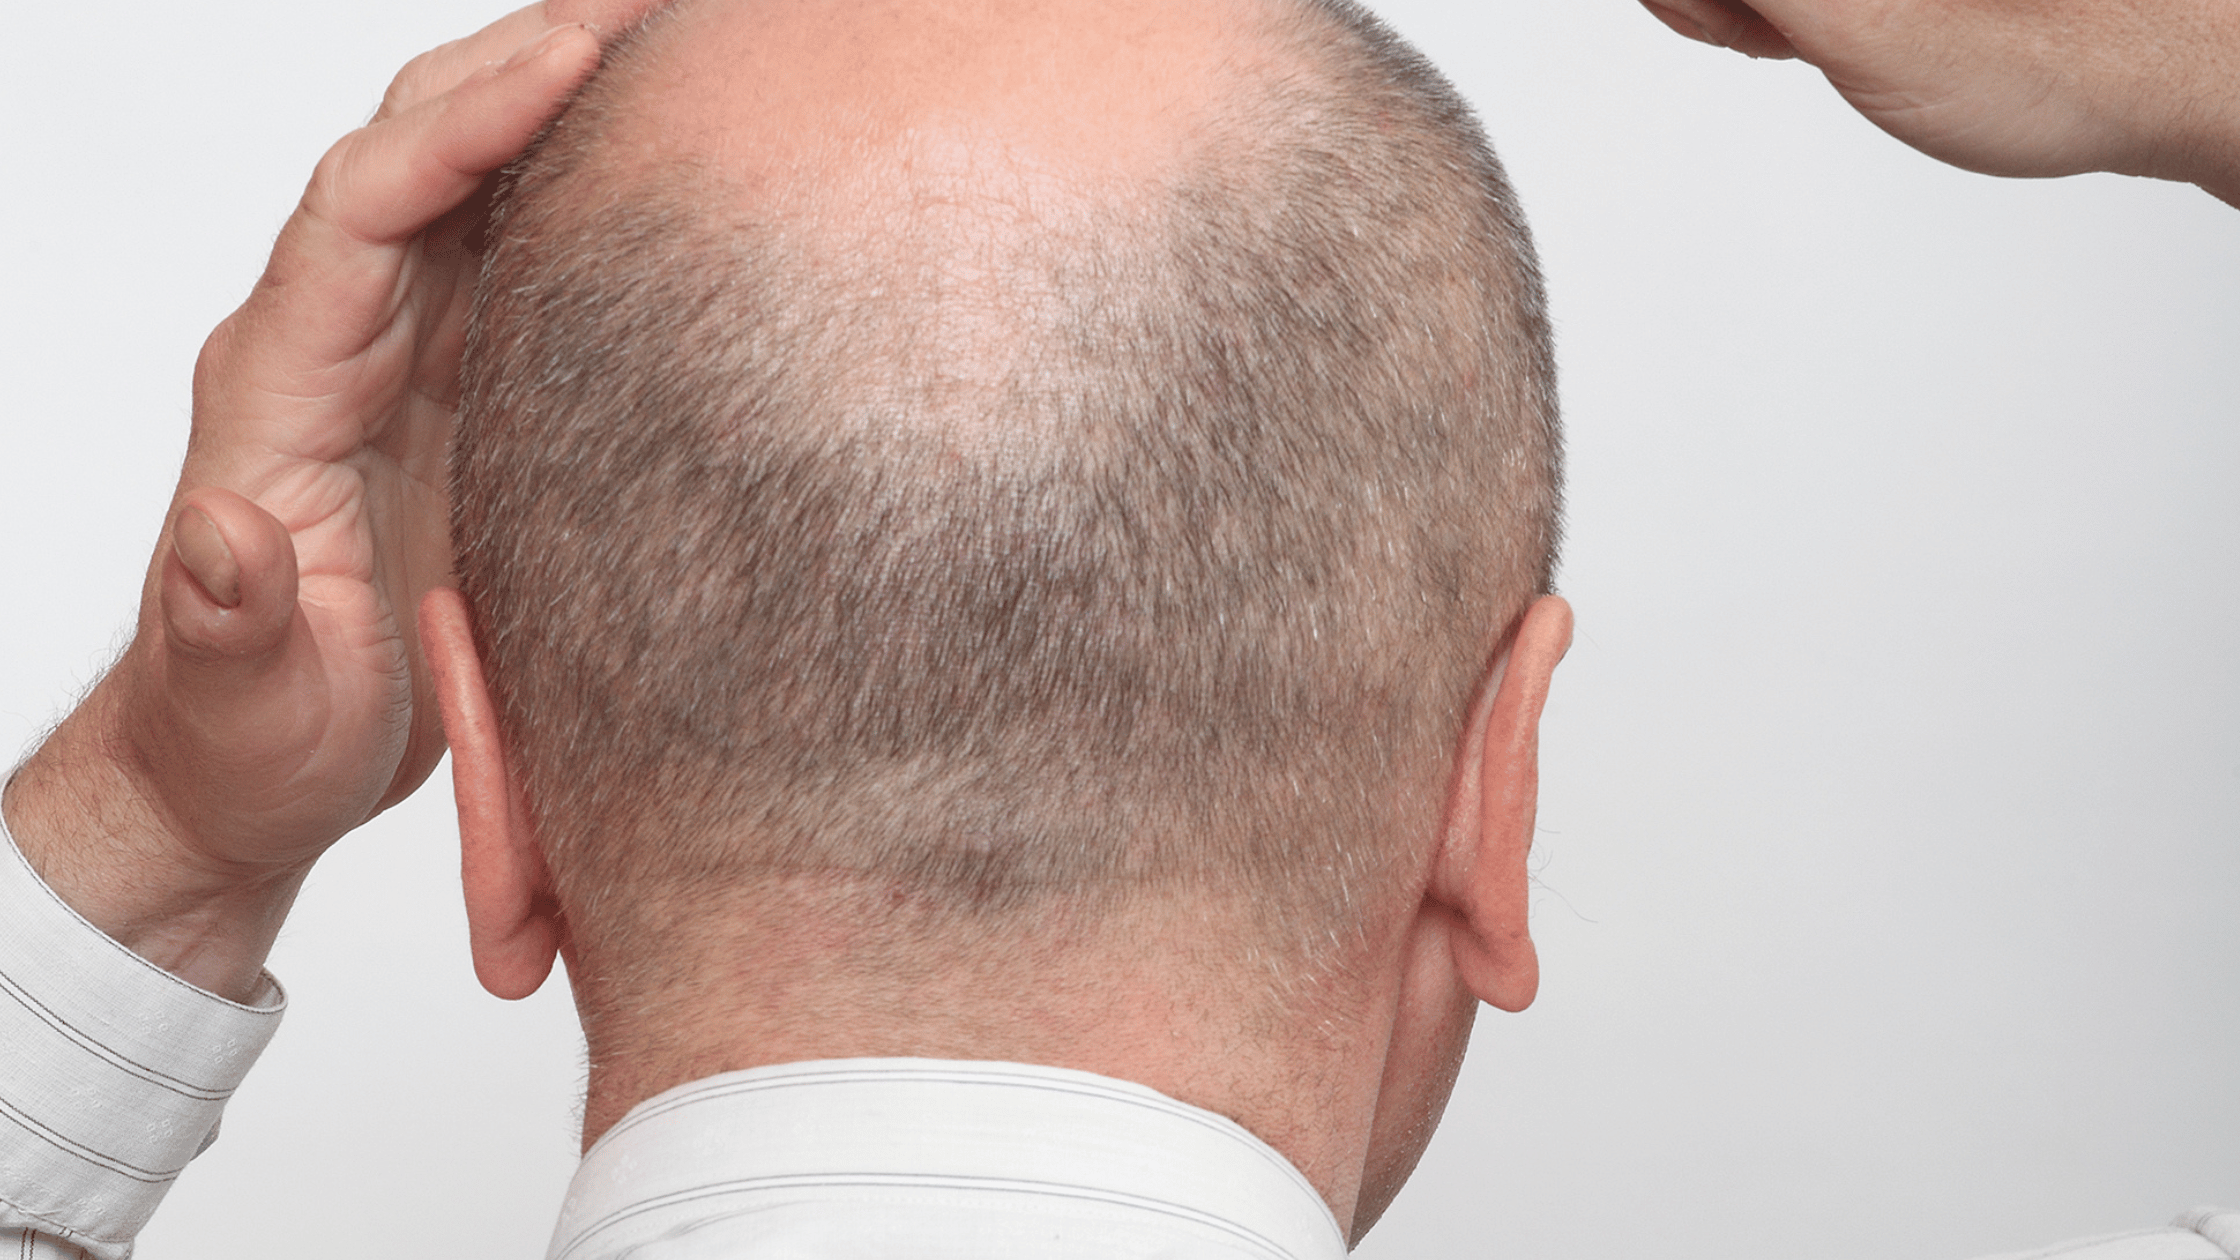 Hair loss by fashion and own actions